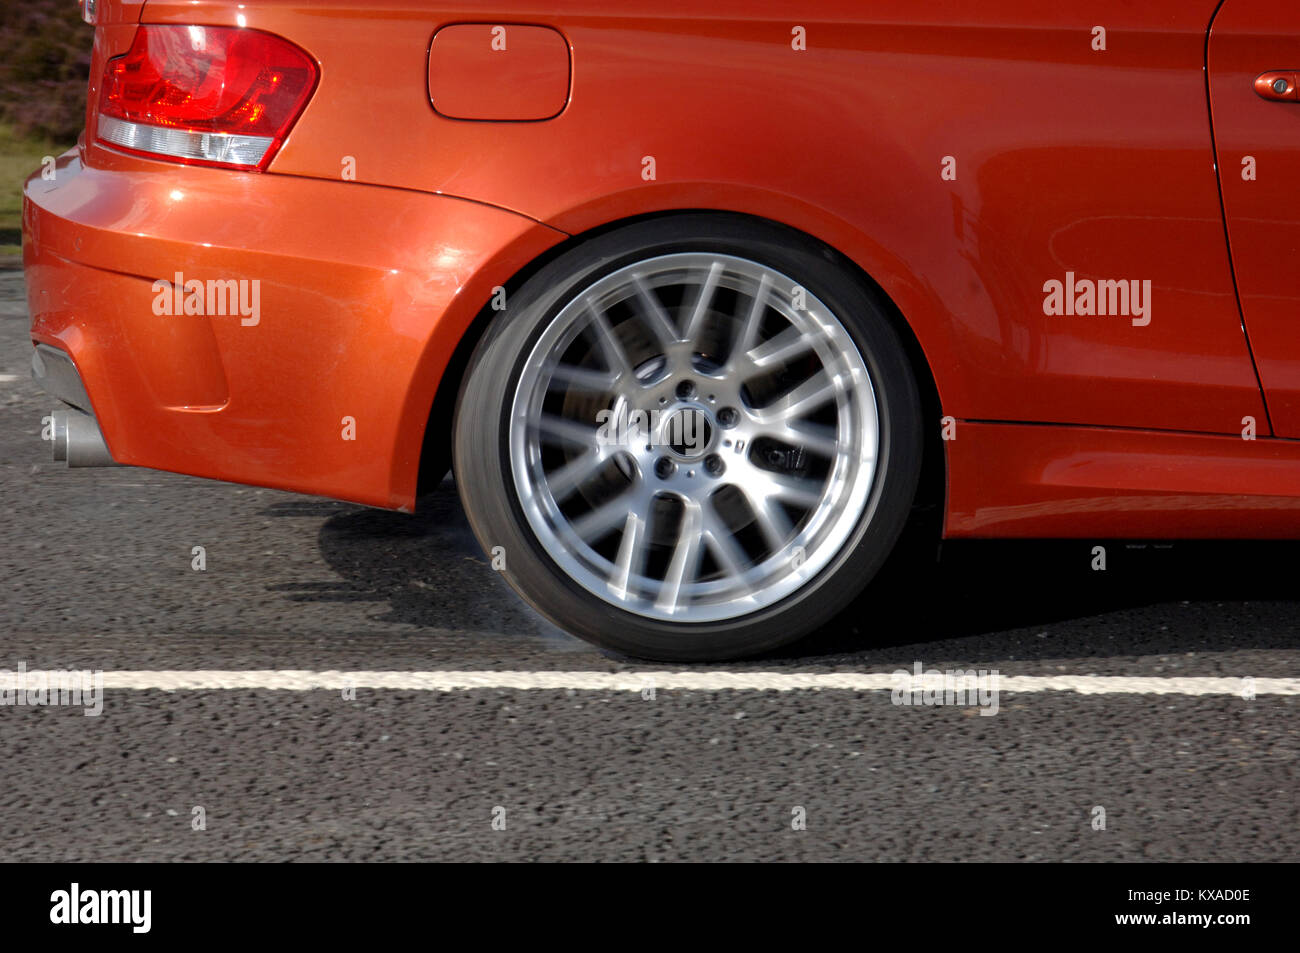 wheel spin and tyre smoke from a 2011 BMW 1M rear wheel drive German sports car Stock Photo